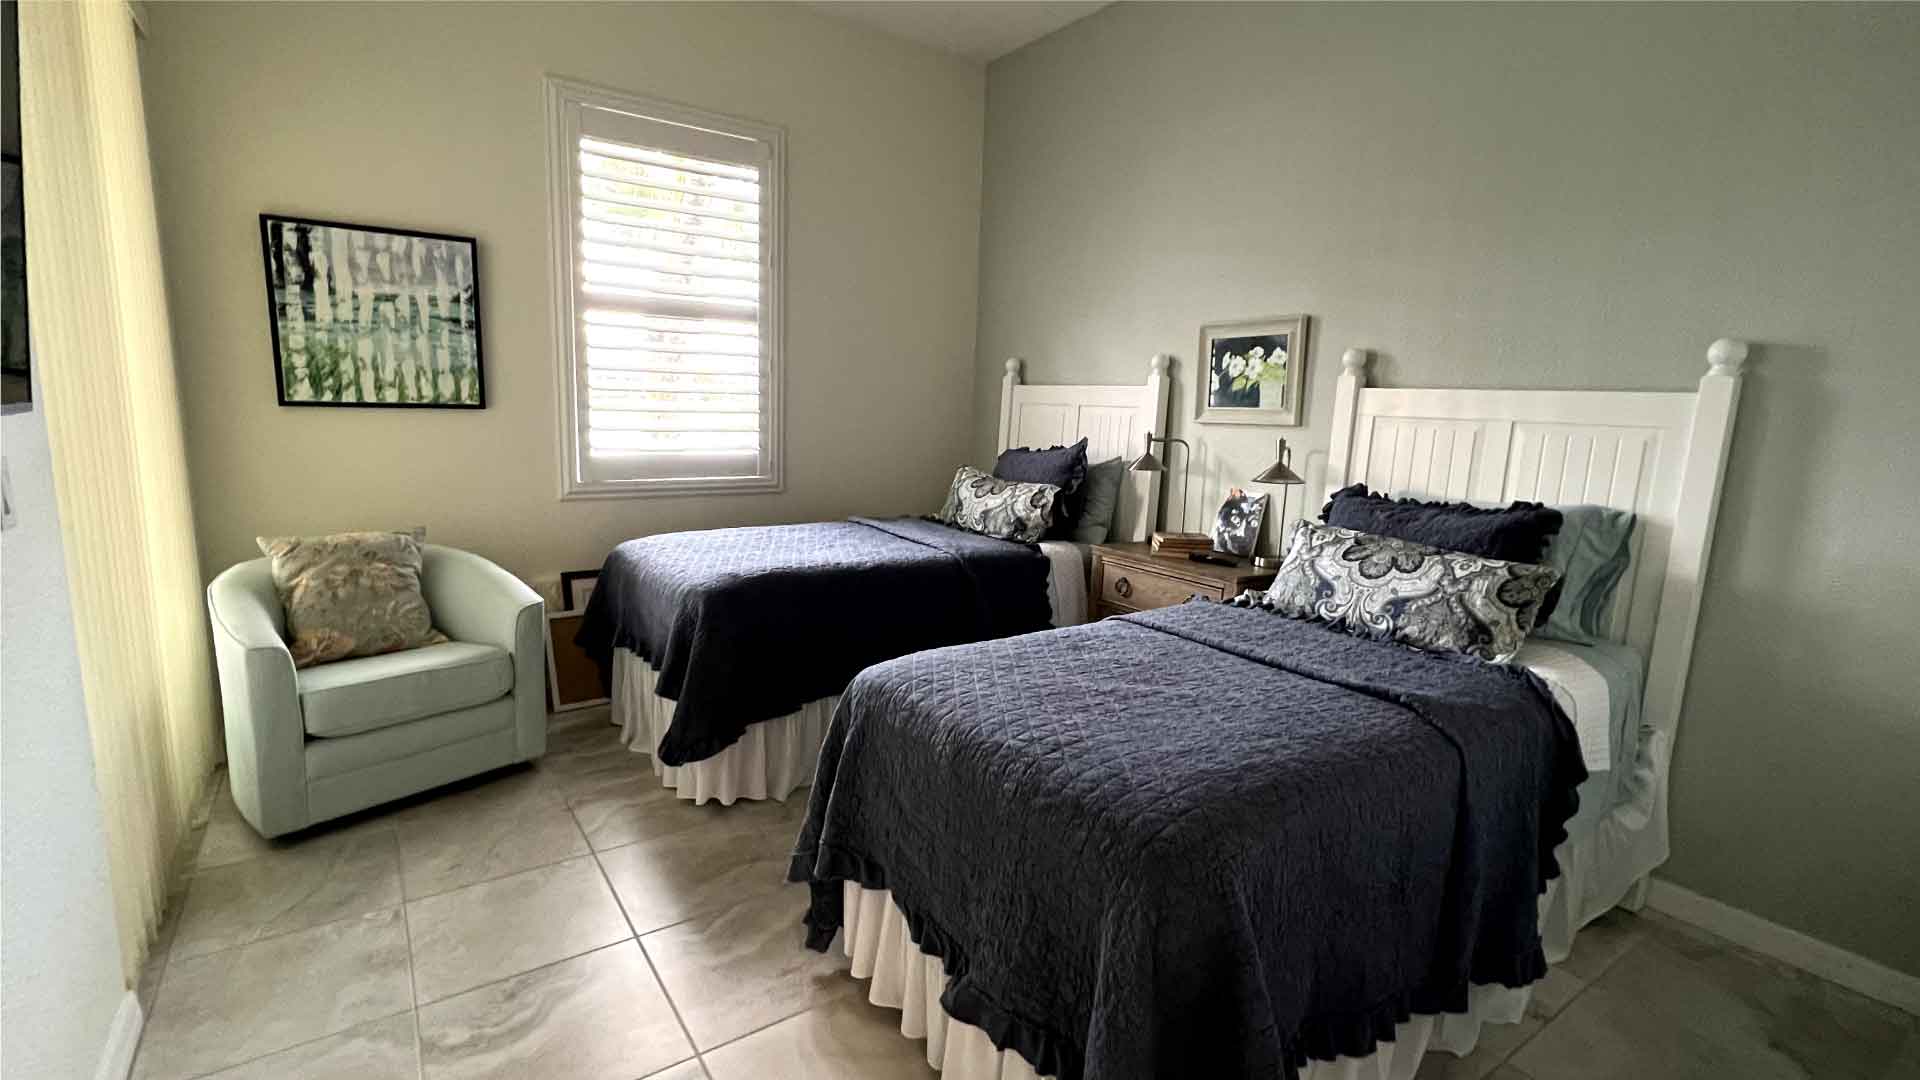 Bedroom cleaning - Deep cleaning in Cape Coral by Goldmillio - Jan 17